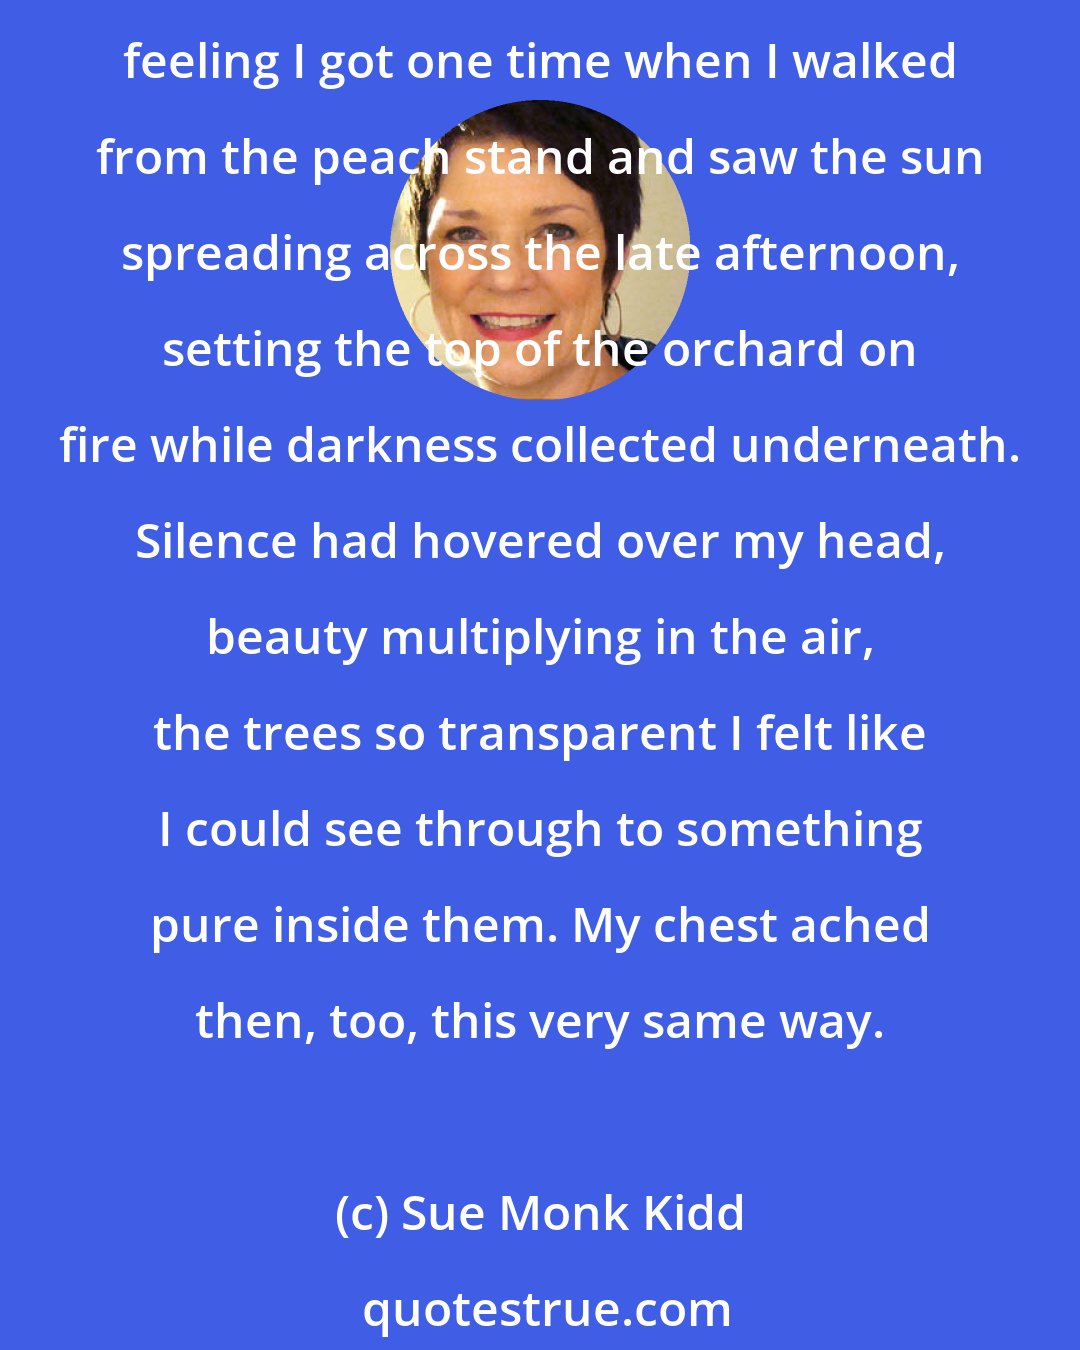 Sue Monk Kidd: I didn't know what to think, but what I felt was magnetic and so big it ached like the moon had entered my chest and filled it up. The only think I could compare it to was the feeling I got one time when I walked from the peach stand and saw the sun spreading across the late afternoon, setting the top of the orchard on fire while darkness collected underneath. Silence had hovered over my head, beauty multiplying in the air, the trees so transparent I felt like I could see through to something pure inside them. My chest ached then, too, this very same way.